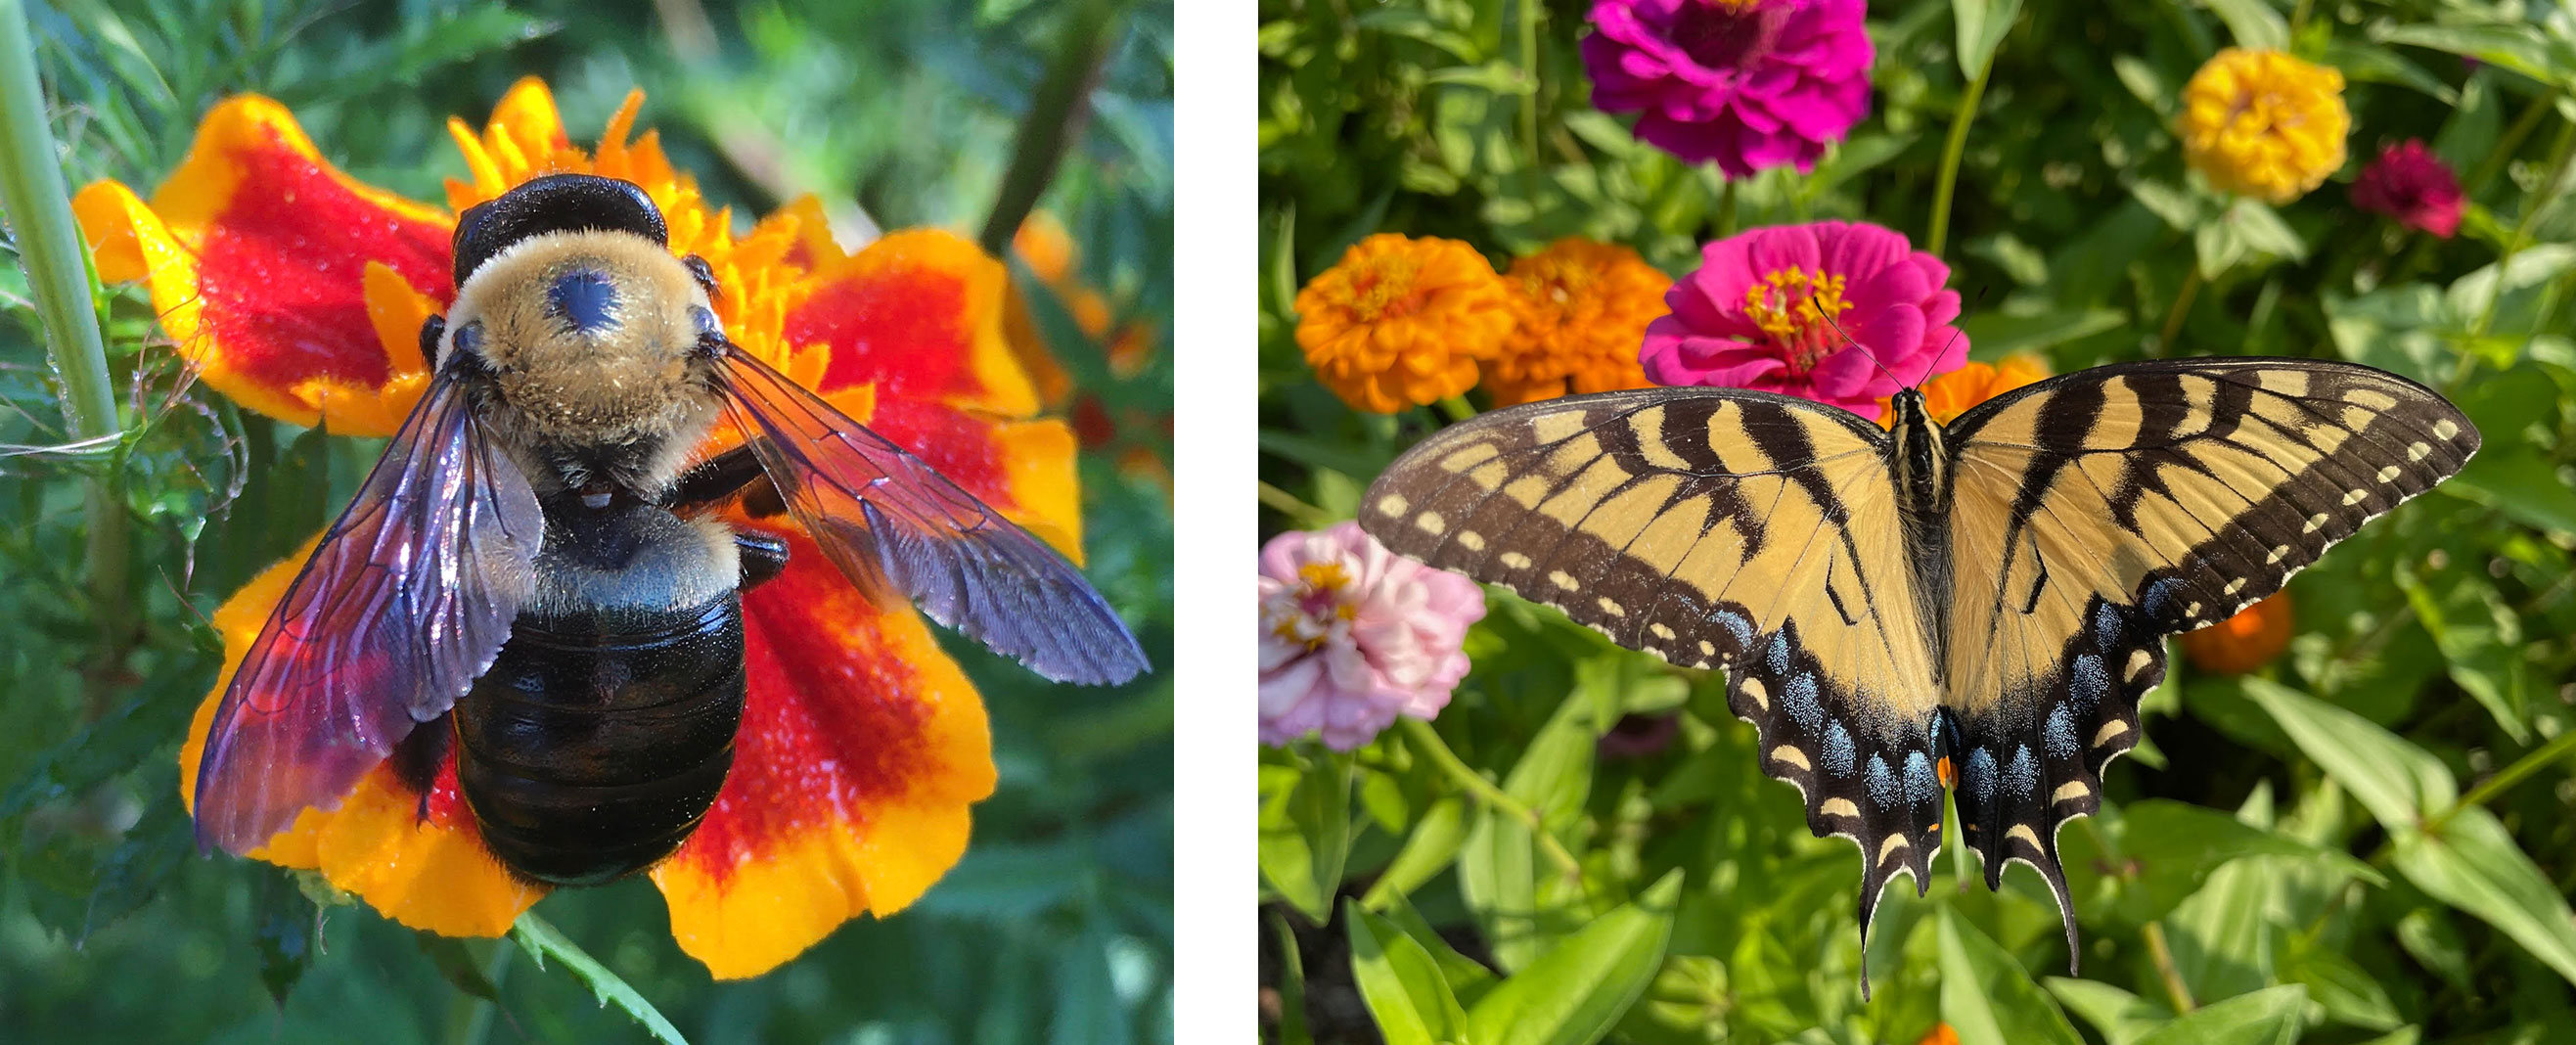 close-up photographs of a bee and a monarch butterfly